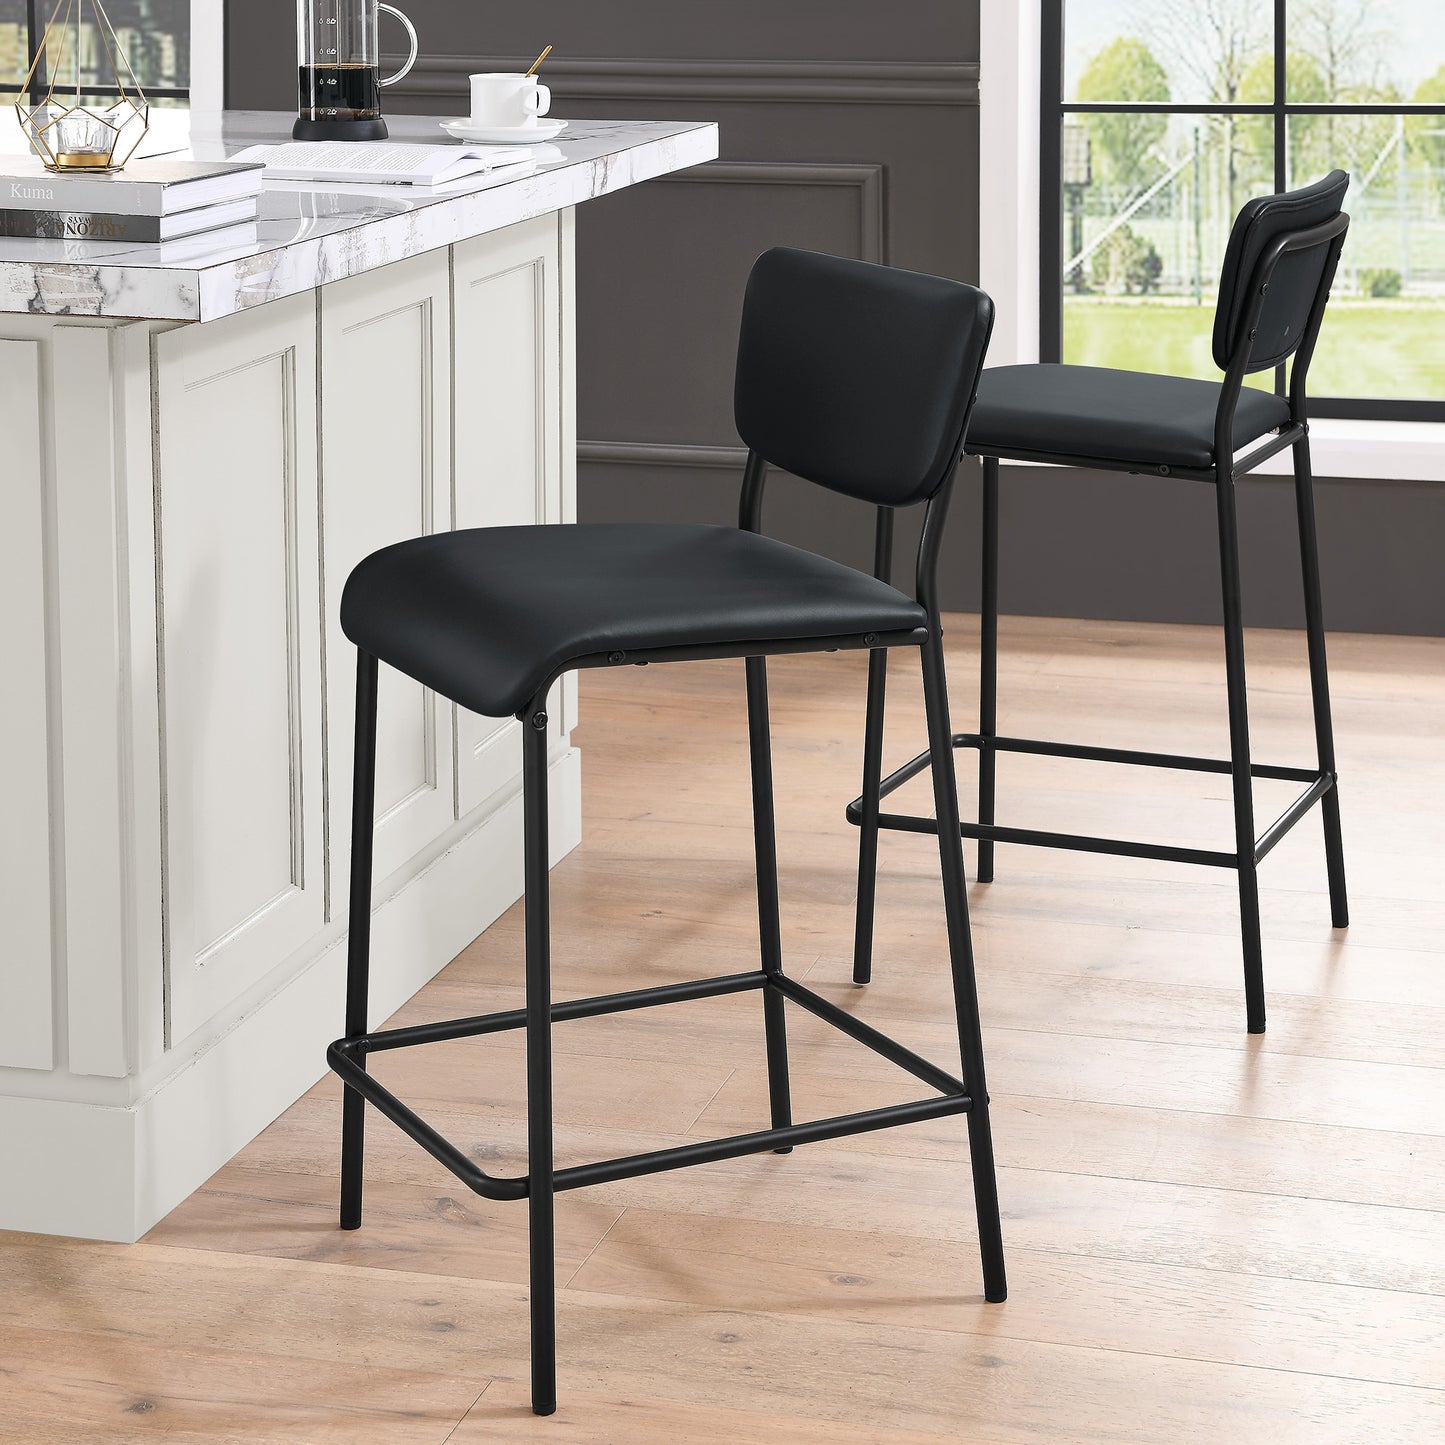 Pu Faux Leather Counter Stools Set of 2, Pub Counter Stool with Back and Footrest, Black (17.5"x19.25“x34.5”）